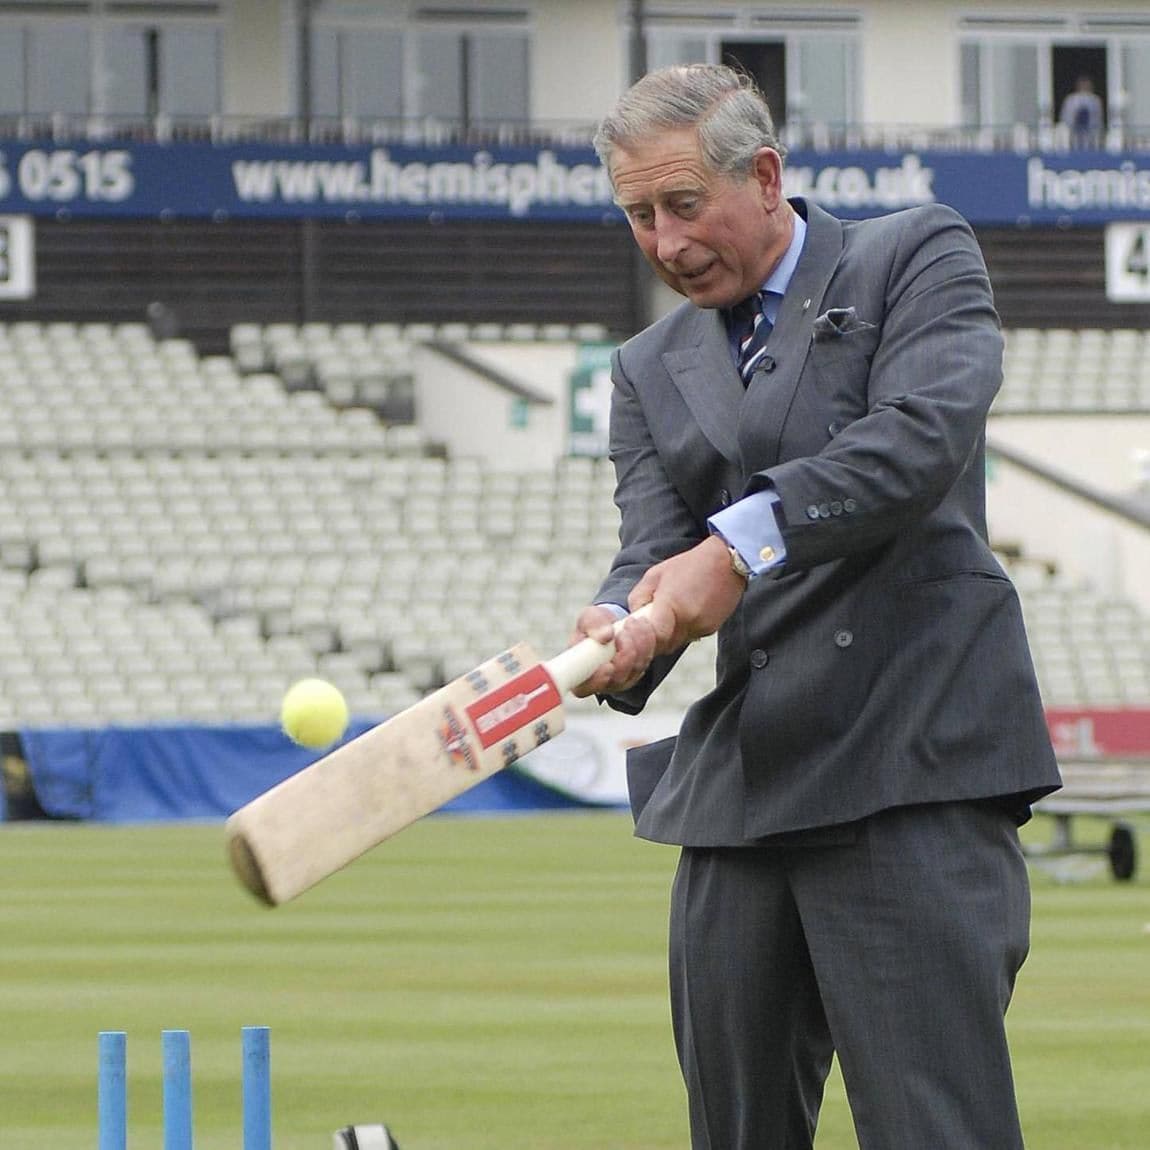 HRH Prince of Wales attends the Prince's Trust Cricket Programme